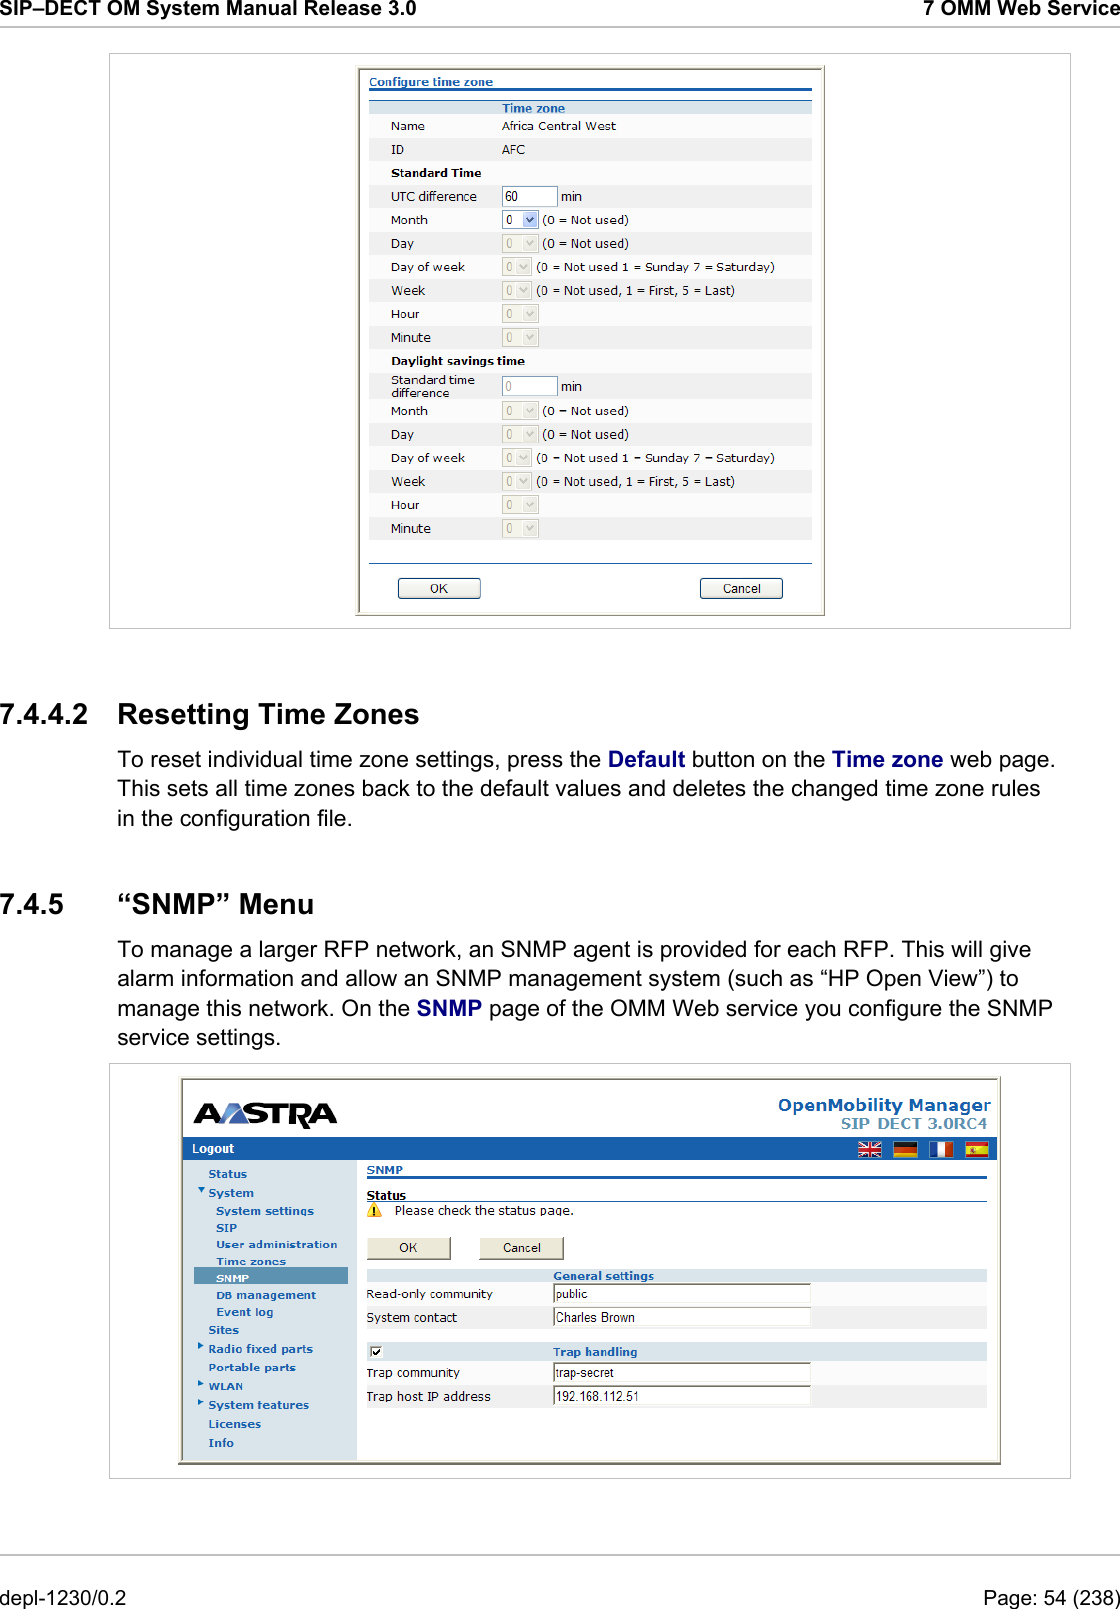 SIP–DECT OM System Manual Release 3.0  7 OMM Web Service  7.4.4.2  Resetting Time Zones To reset individual time zone settings, press the Default button on the Time zone web page. This sets all time zones back to the default values and deletes the changed time zone rules in the configuration file. 7.4.5 “SNMP” Menu To manage a larger RFP network, an SNMP agent is provided for each RFP. This will give alarm information and allow an SNMP management system (such as “HP Open View”) to manage this network. On the SNMP page of the OMM Web service you configure the SNMP service settings.  depl-1230/0.2  Page: 54 (238) 